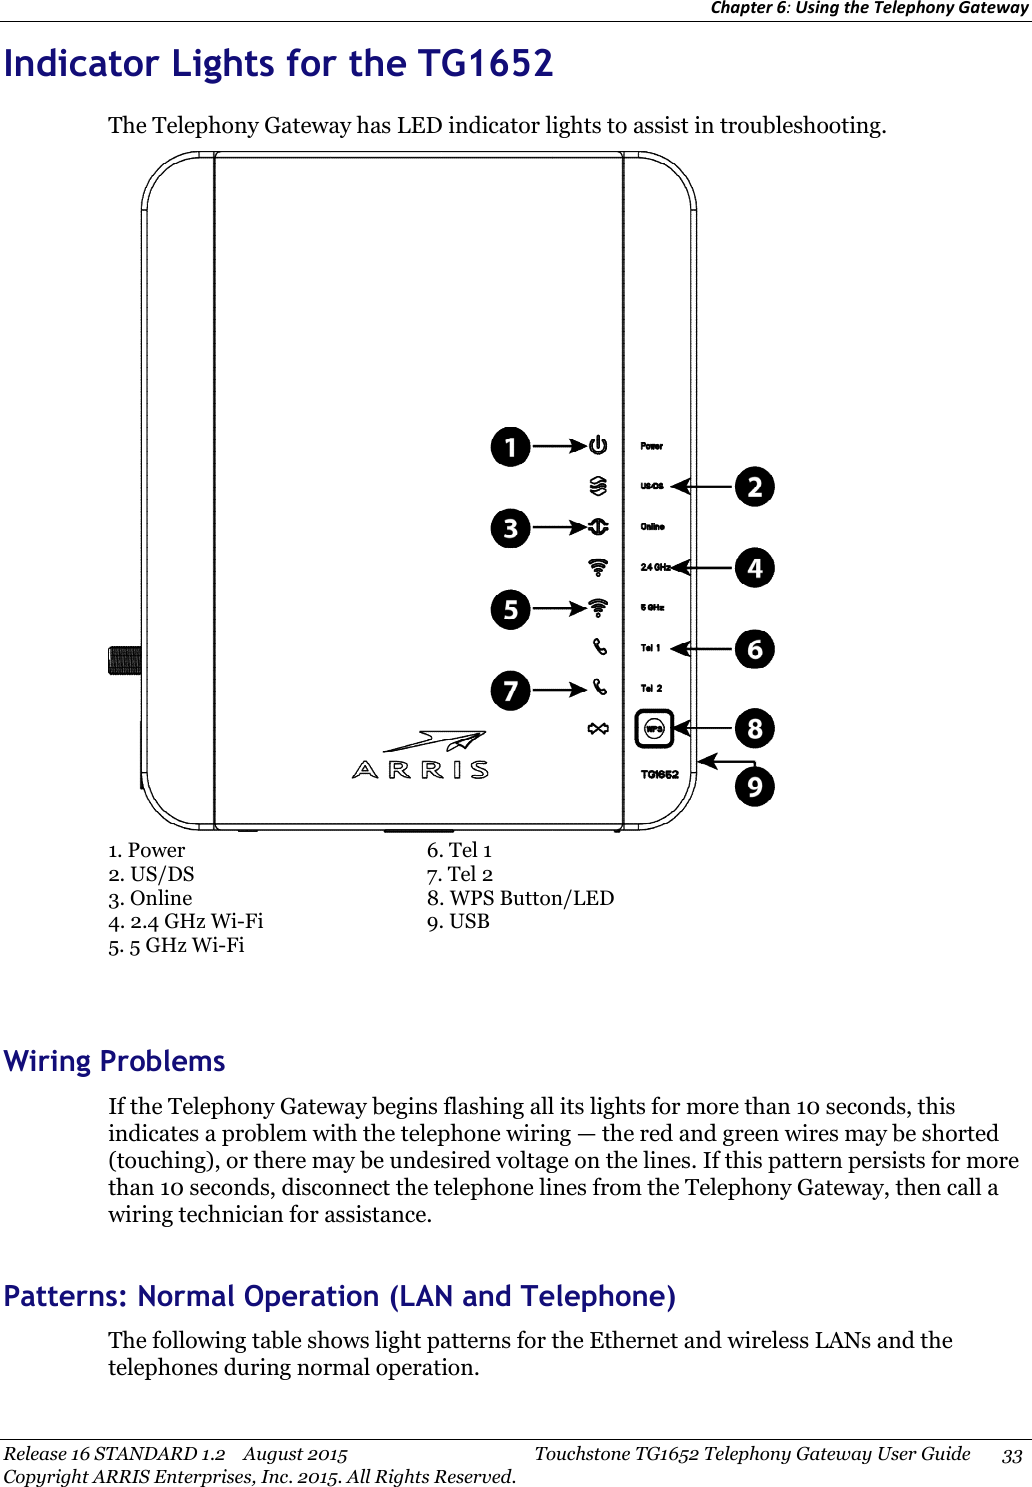 Chapter 6:Using the Telephony GatewayRelease 16 STANDARD 1.2 August 2015 Touchstone TG1652 Telephony Gateway User Guide 33Copyright ARRIS Enterprises, Inc. 2015. All Rights Reserved.Indicator Lights for the TG1652The Telephony Gateway has LED indicator lights to assist in troubleshooting.1. Power2. US/DS3. Online4. 2.4 GHz Wi-Fi5. 5 GHz Wi-Fi6. Tel 17. Tel 28. WPS Button/LED9. USBWiring ProblemsIf the Telephony Gateway begins flashing all its lights for more than 10 seconds, thisindicates a problem with the telephone wiring — the red and green wires may be shorted(touching), or there may be undesired voltage on the lines. If this pattern persists for morethan 10 seconds, disconnect the telephone lines from the Telephony Gateway, then call awiring technician for assistance.Patterns: Normal Operation (LAN and Telephone)The following table shows light patterns for the Ethernet and wireless LANs and thetelephones during normal operation.